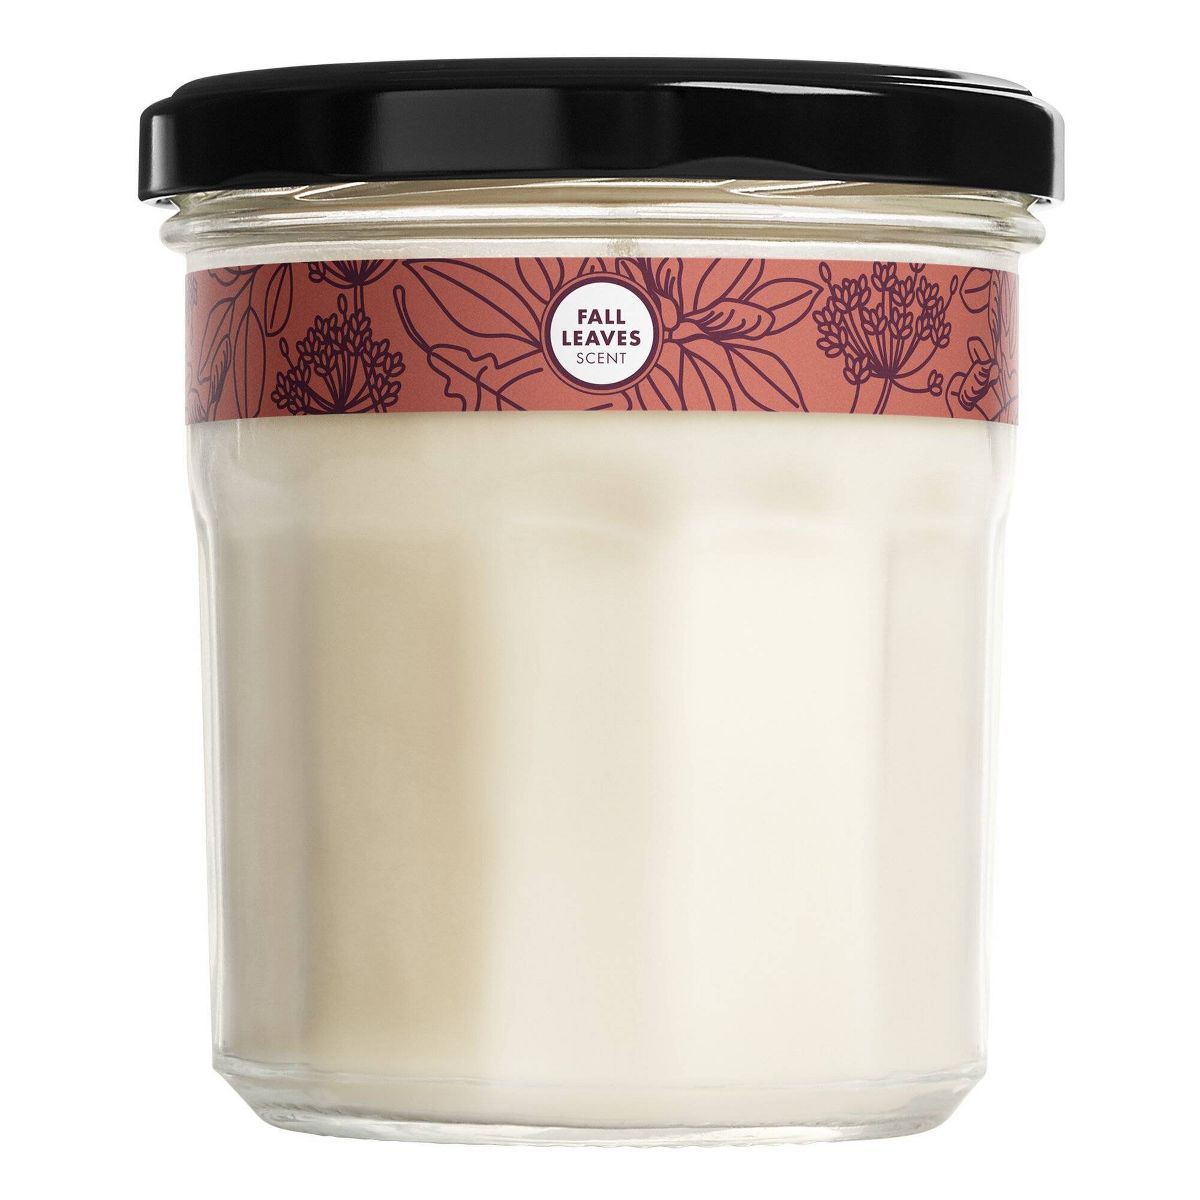 Mrs. Meyer's Clean Day Large Scented Soy Candle - Fall Leaves - 7.2oz | Target